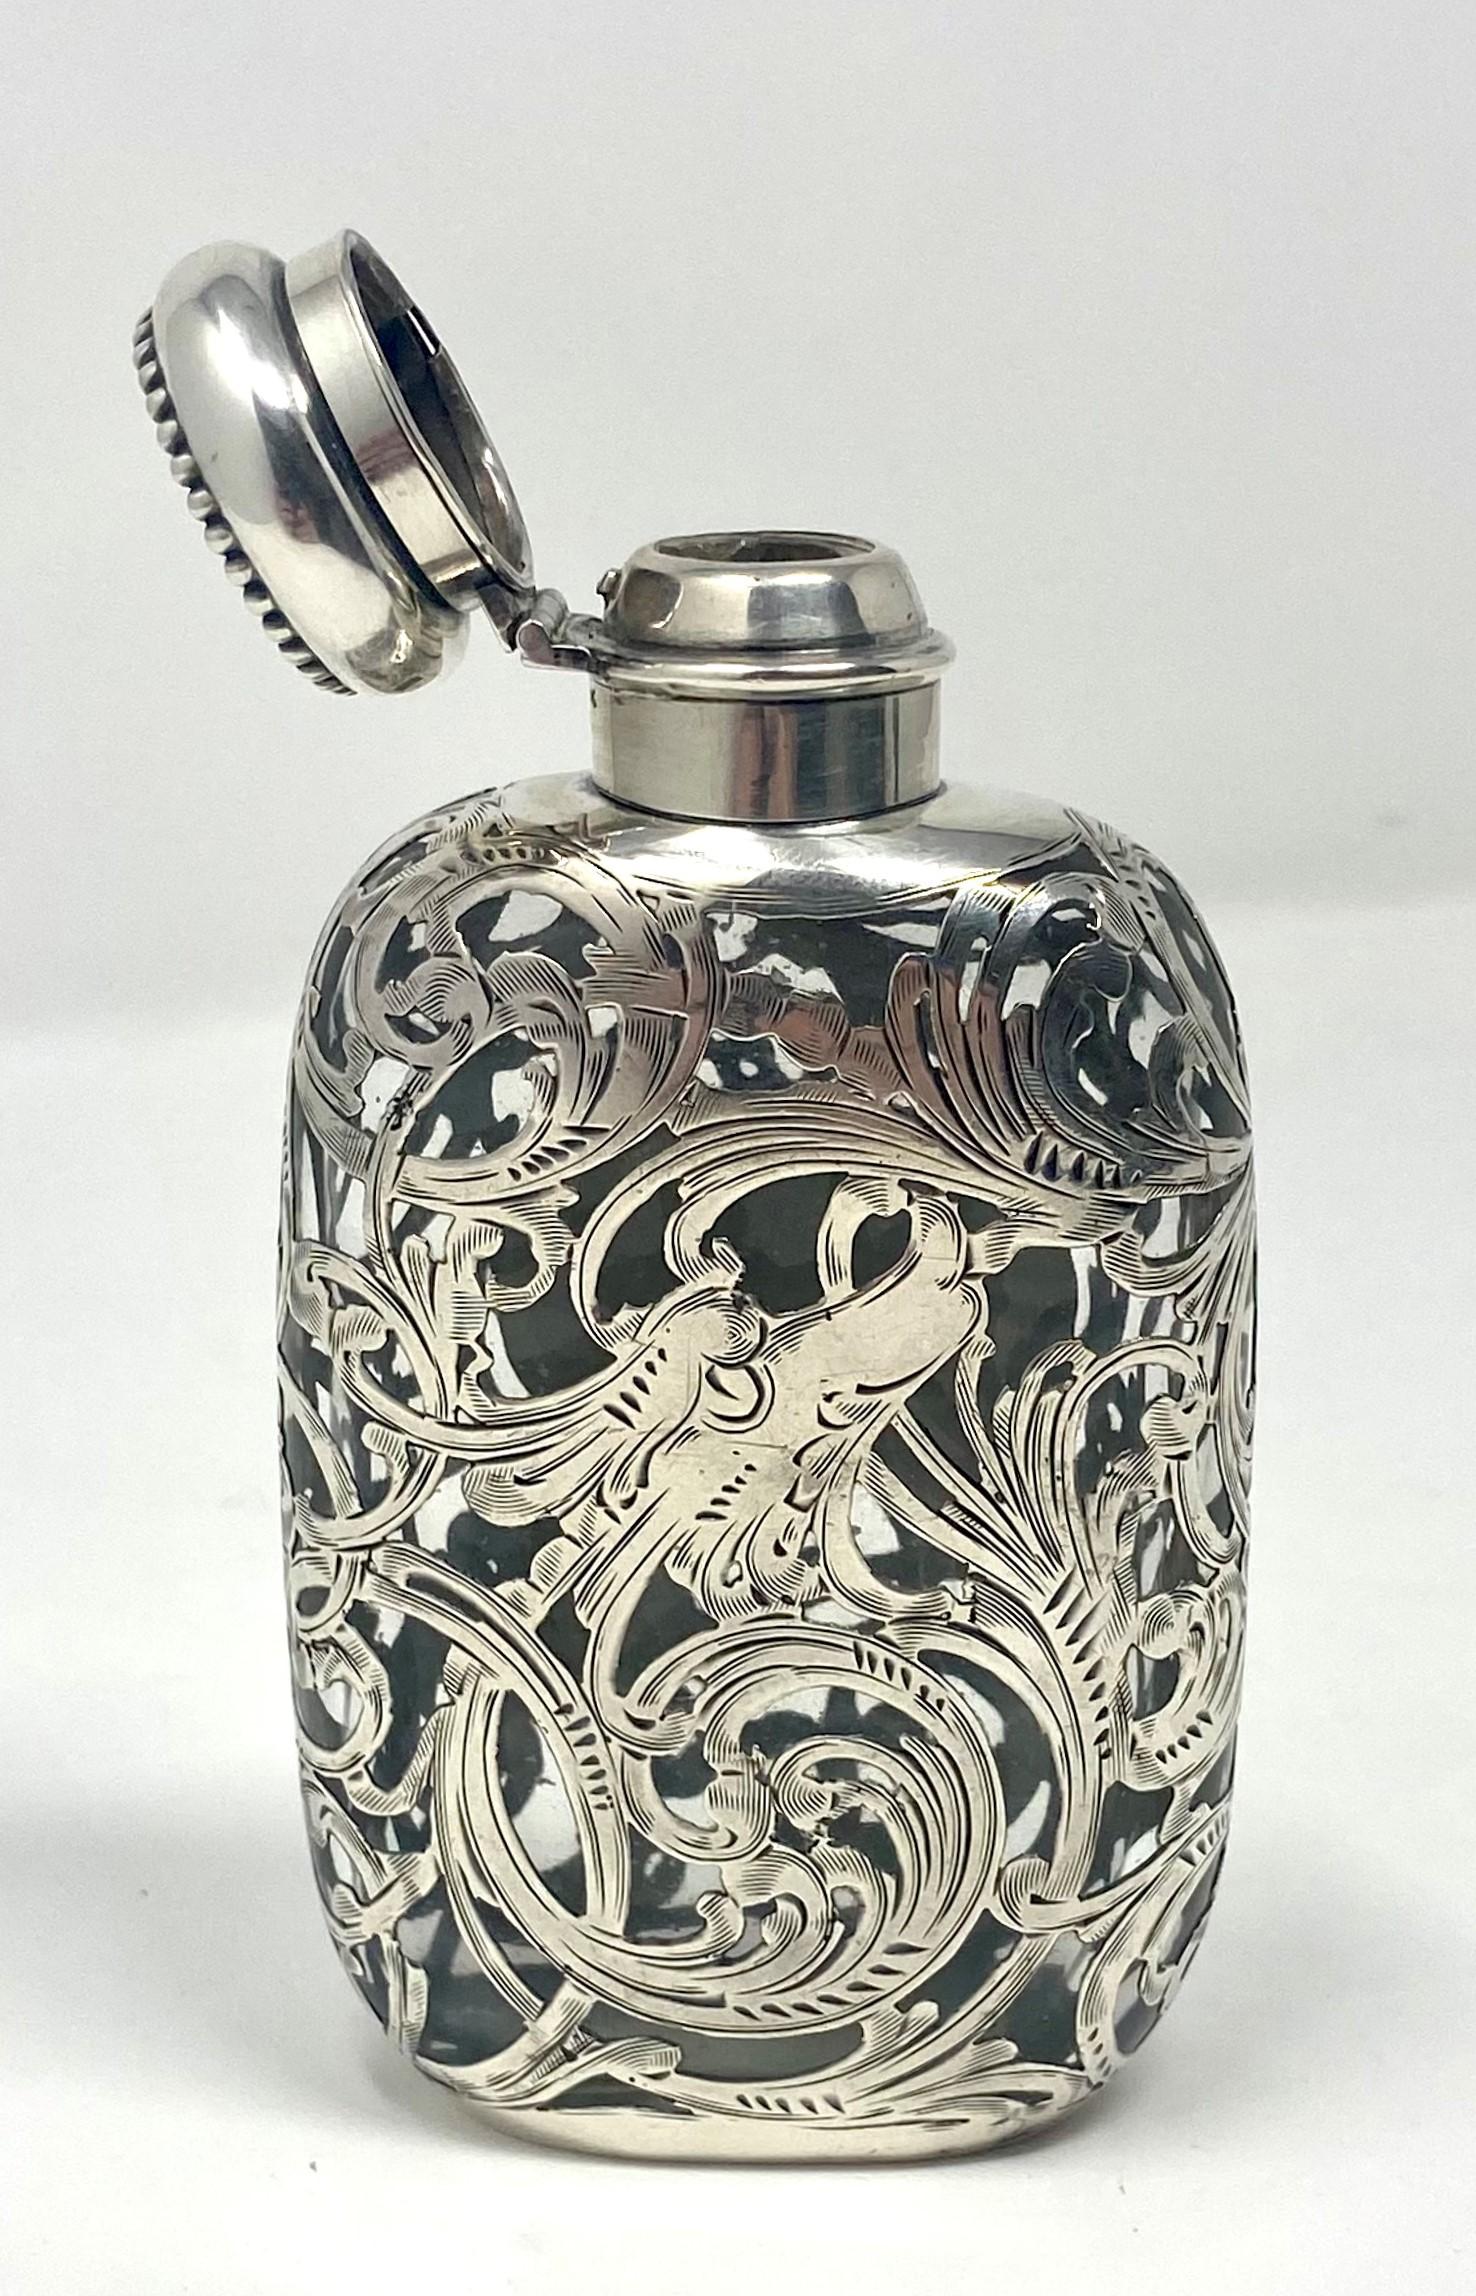 Fine antique American sterling silver overlay flask, circa 1900.